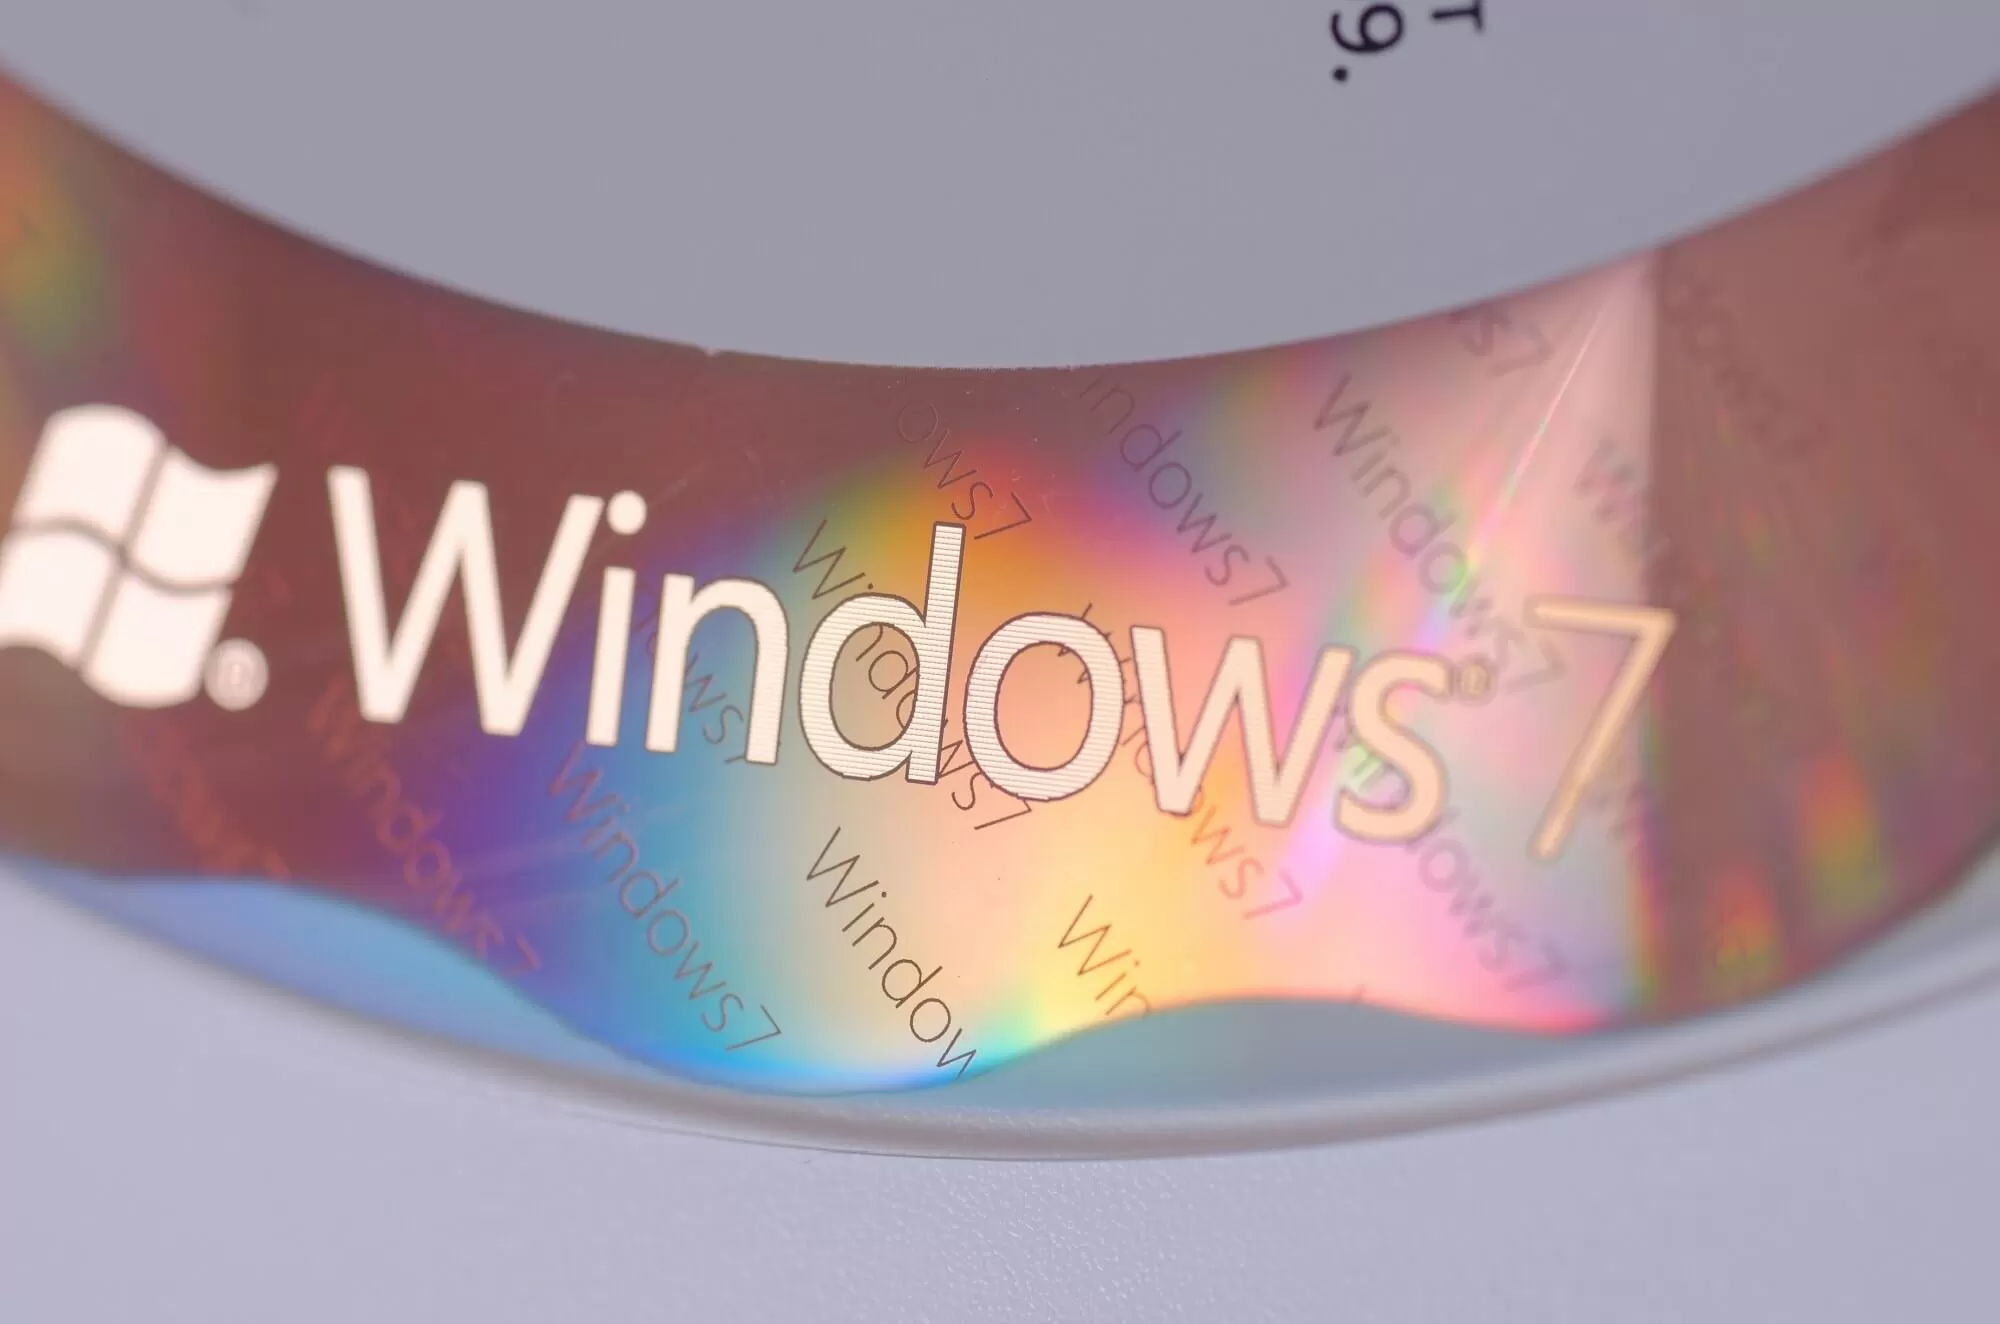 Windows 7 is still used on a quarter of all PCs